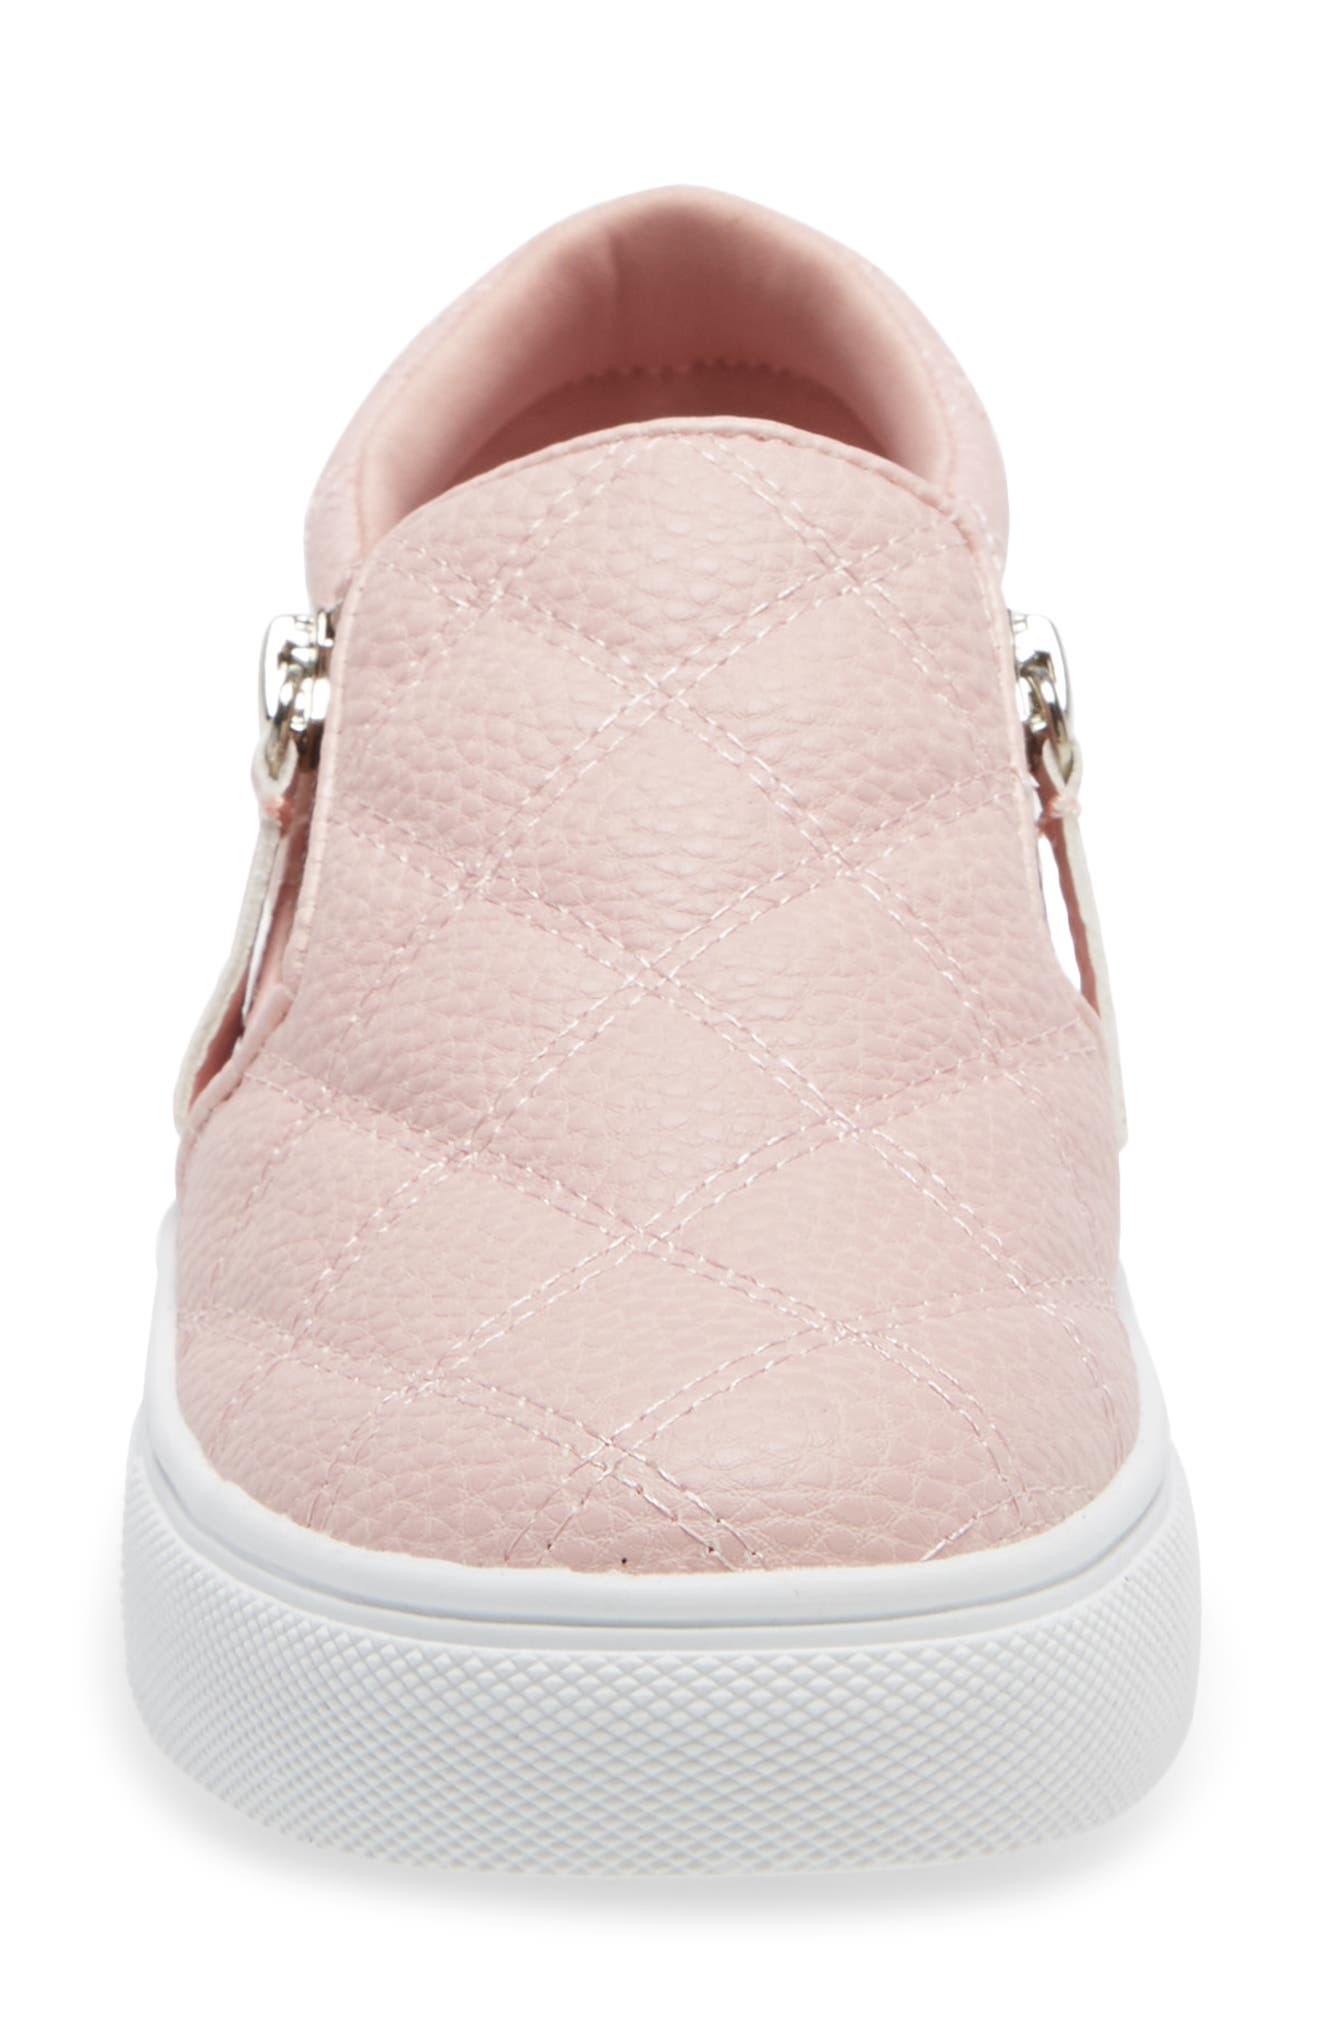 Shoes Sneakers Slip-on Sneakers Steve Madden Slip-on Sneakers gold-colored casual look 